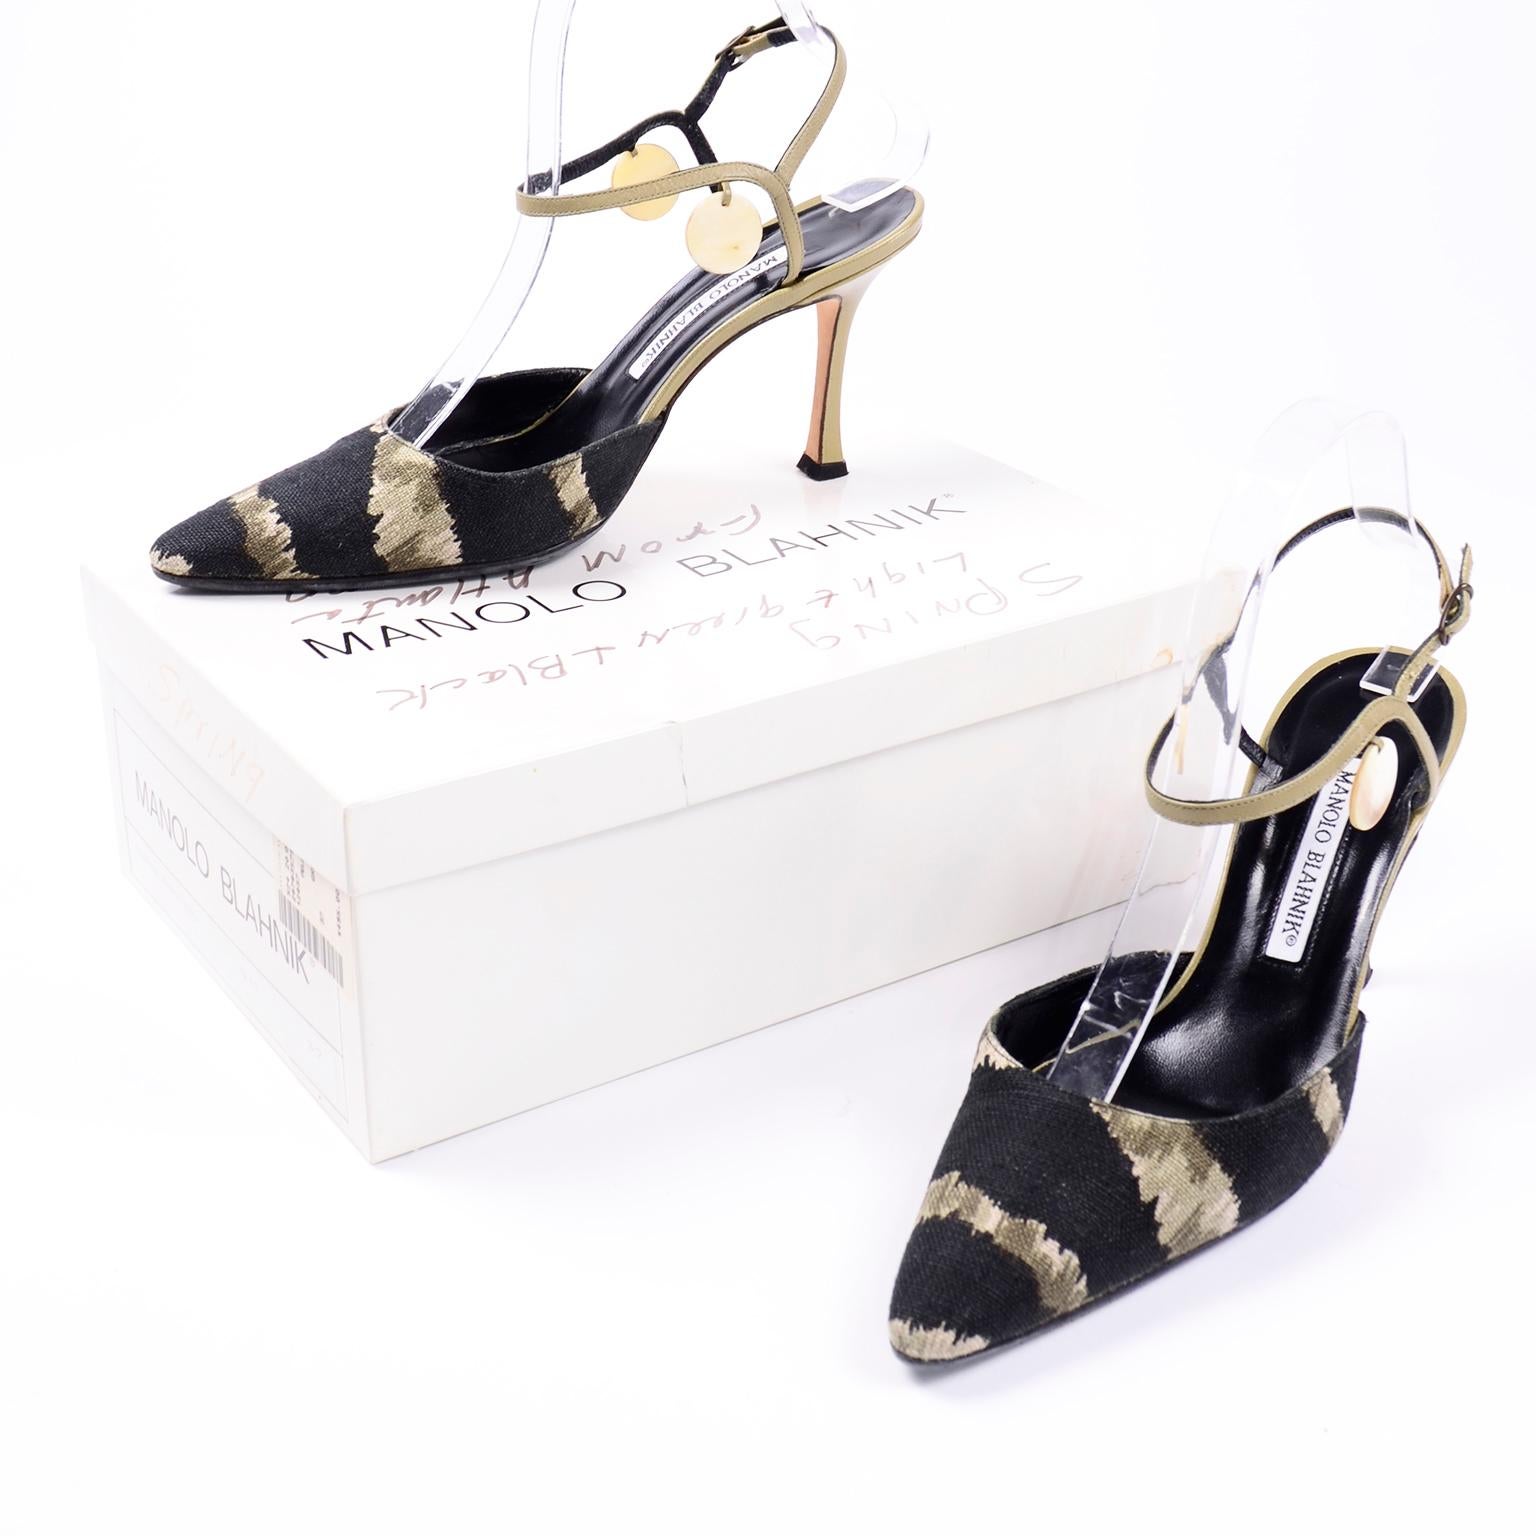 These are really fun vintage Manolo Blahnik black and green canvas printed pointed toe slingback shoes. These shoes have beautiful green leather heels with cream/sage circle discs dangling along the sides of the ankles. There is a metal loop